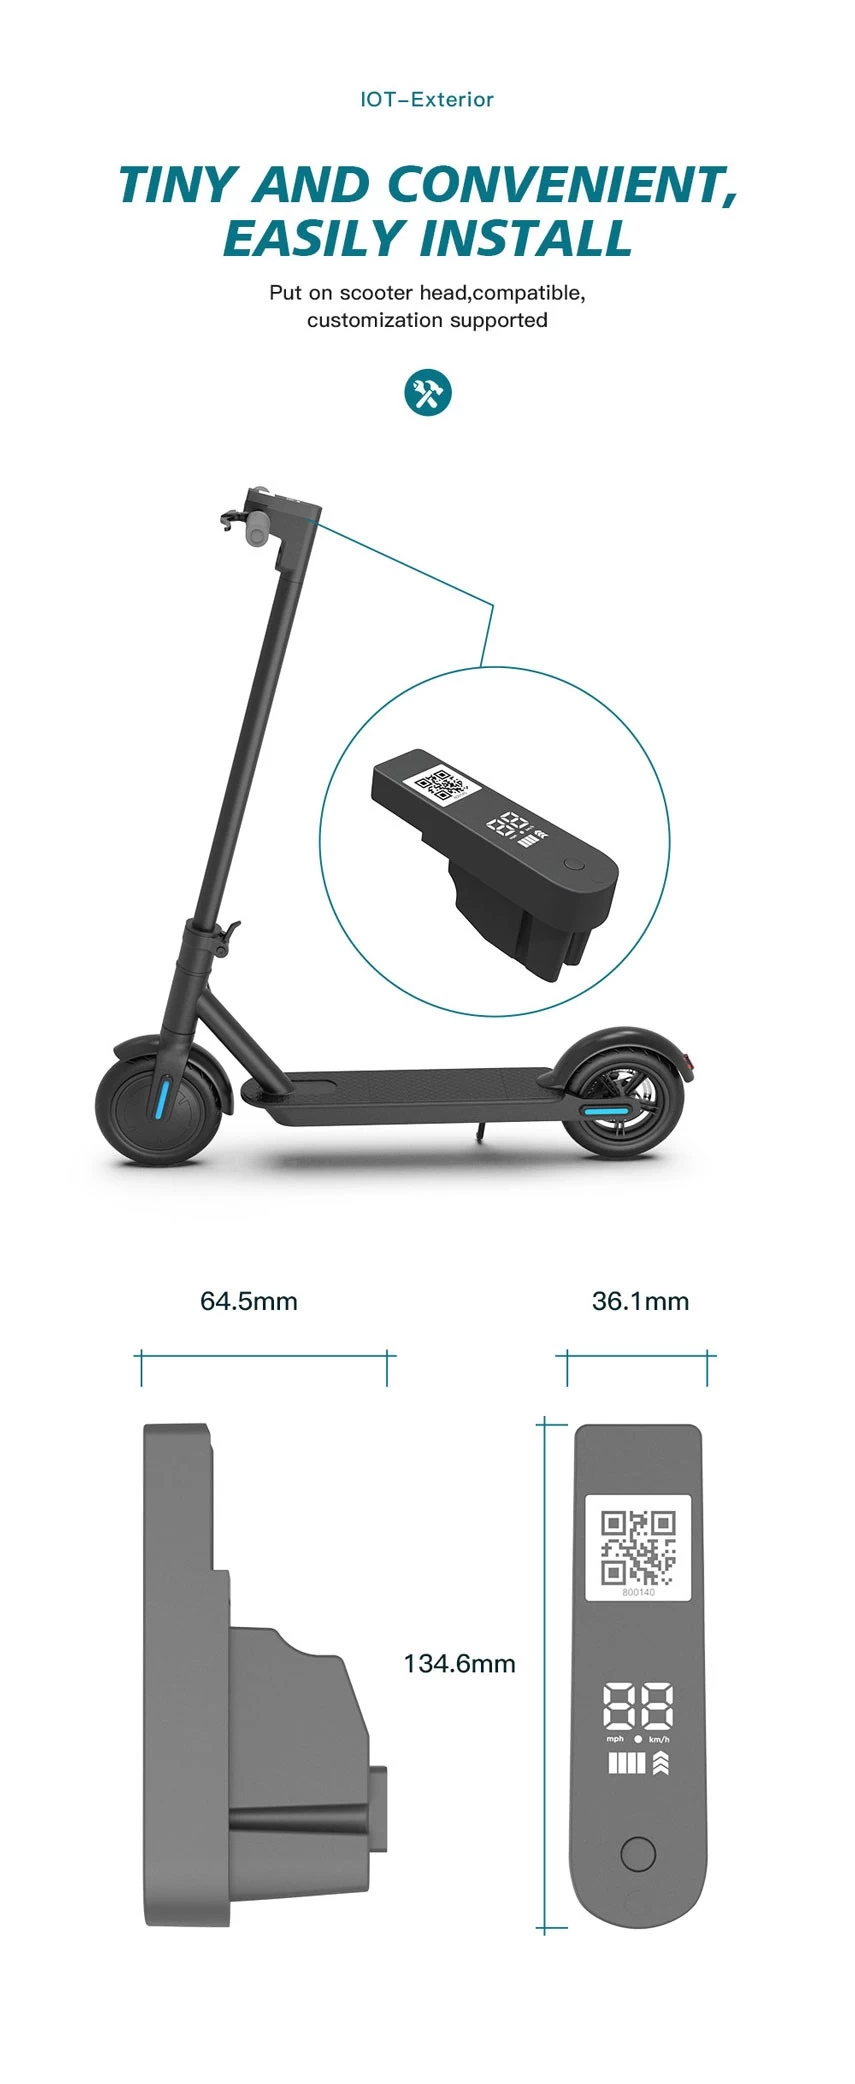 MAX IoT Device Integrated Electric Scooter Lock and GPS Tracking System for Sharing Escooter